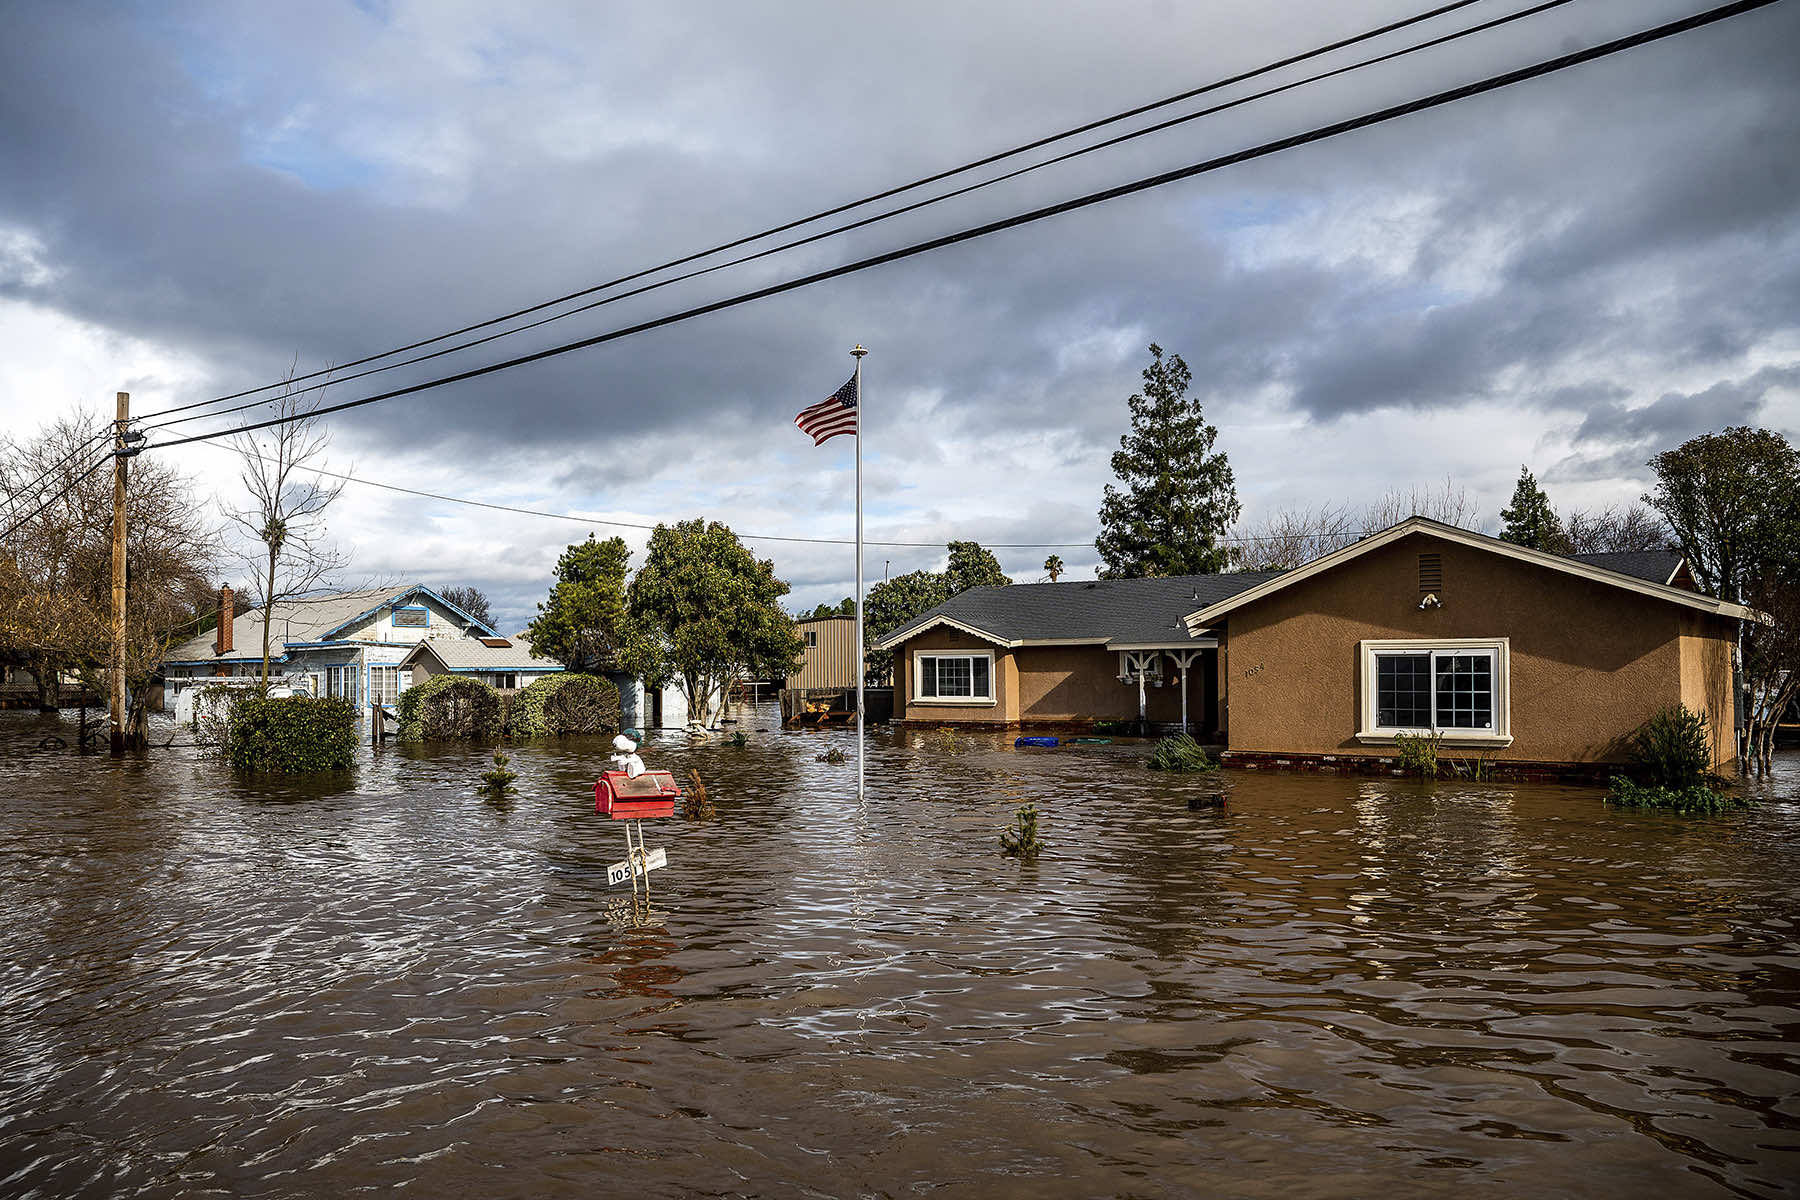 Study details how climate change and flooding risks are transforming where millions of Americans live